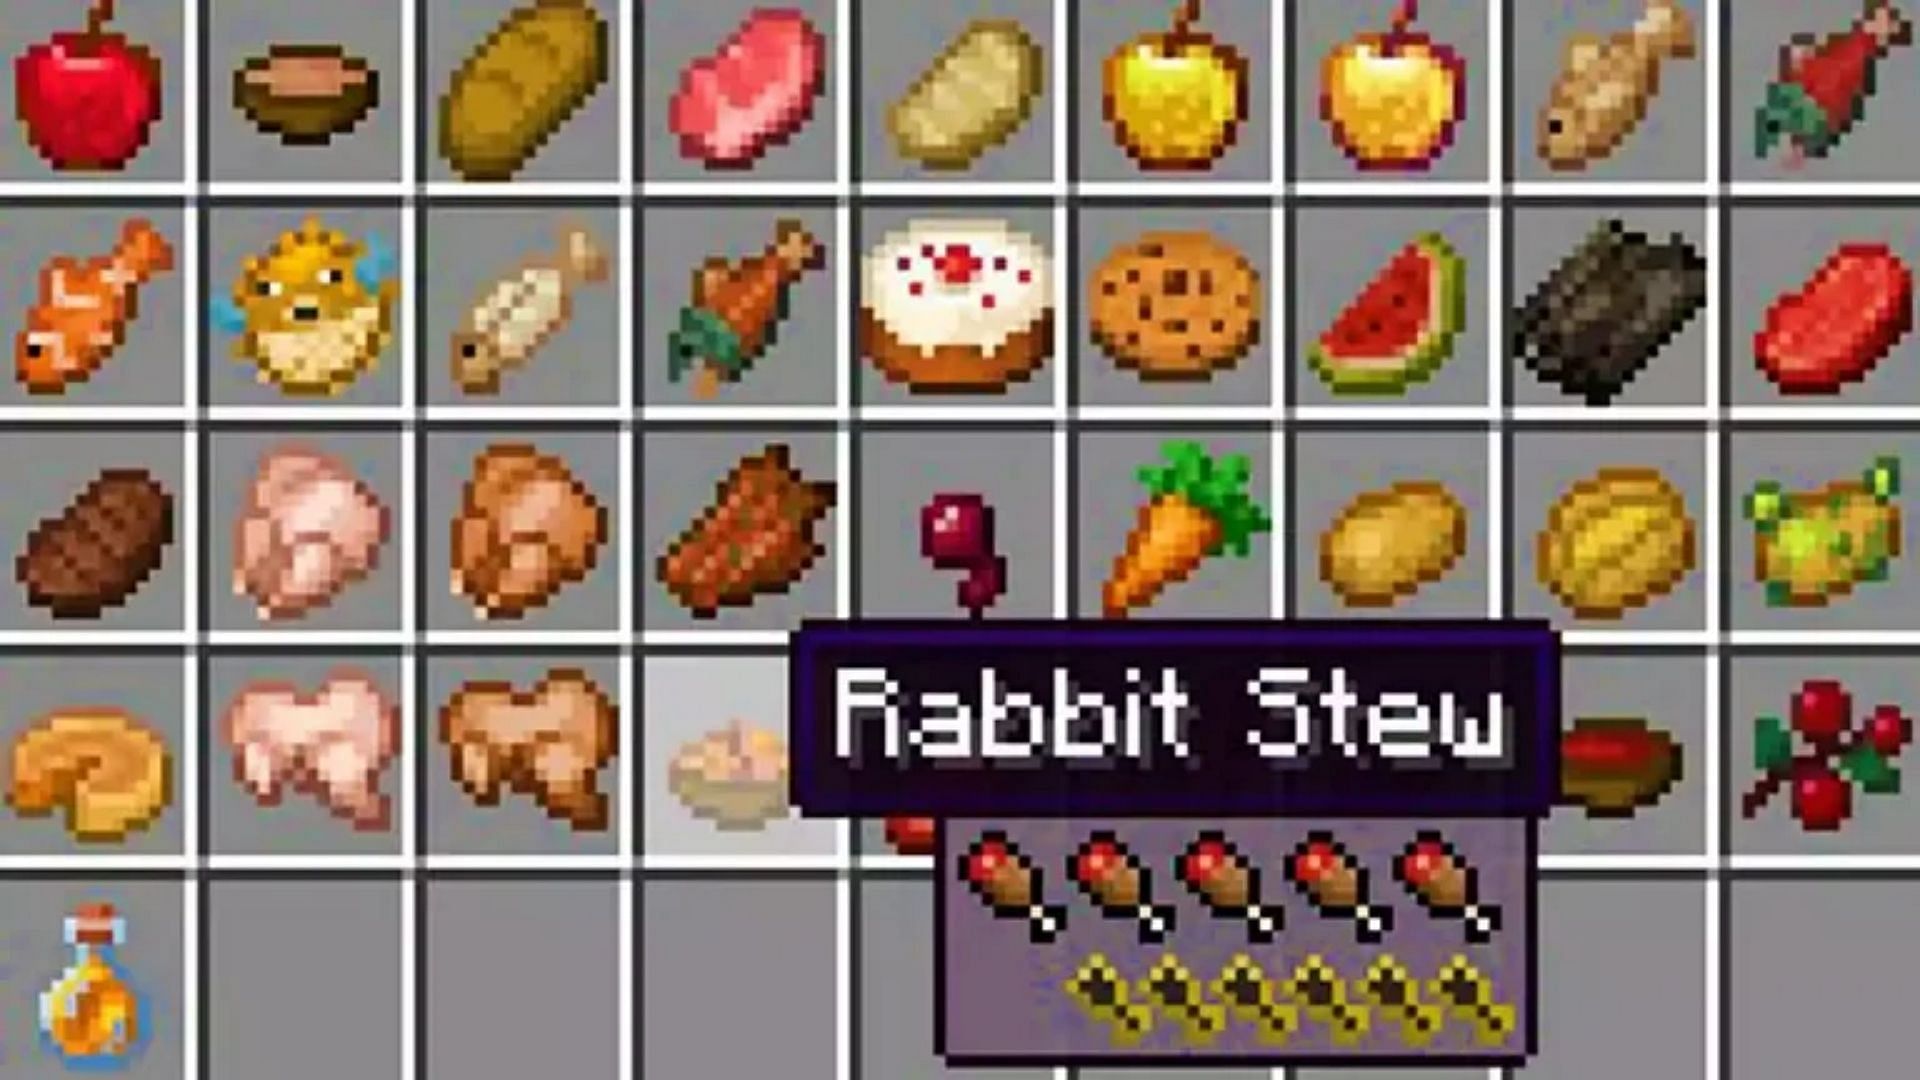 AppleSkin adds much more information about food items in Minecraft (Image via Mojang)